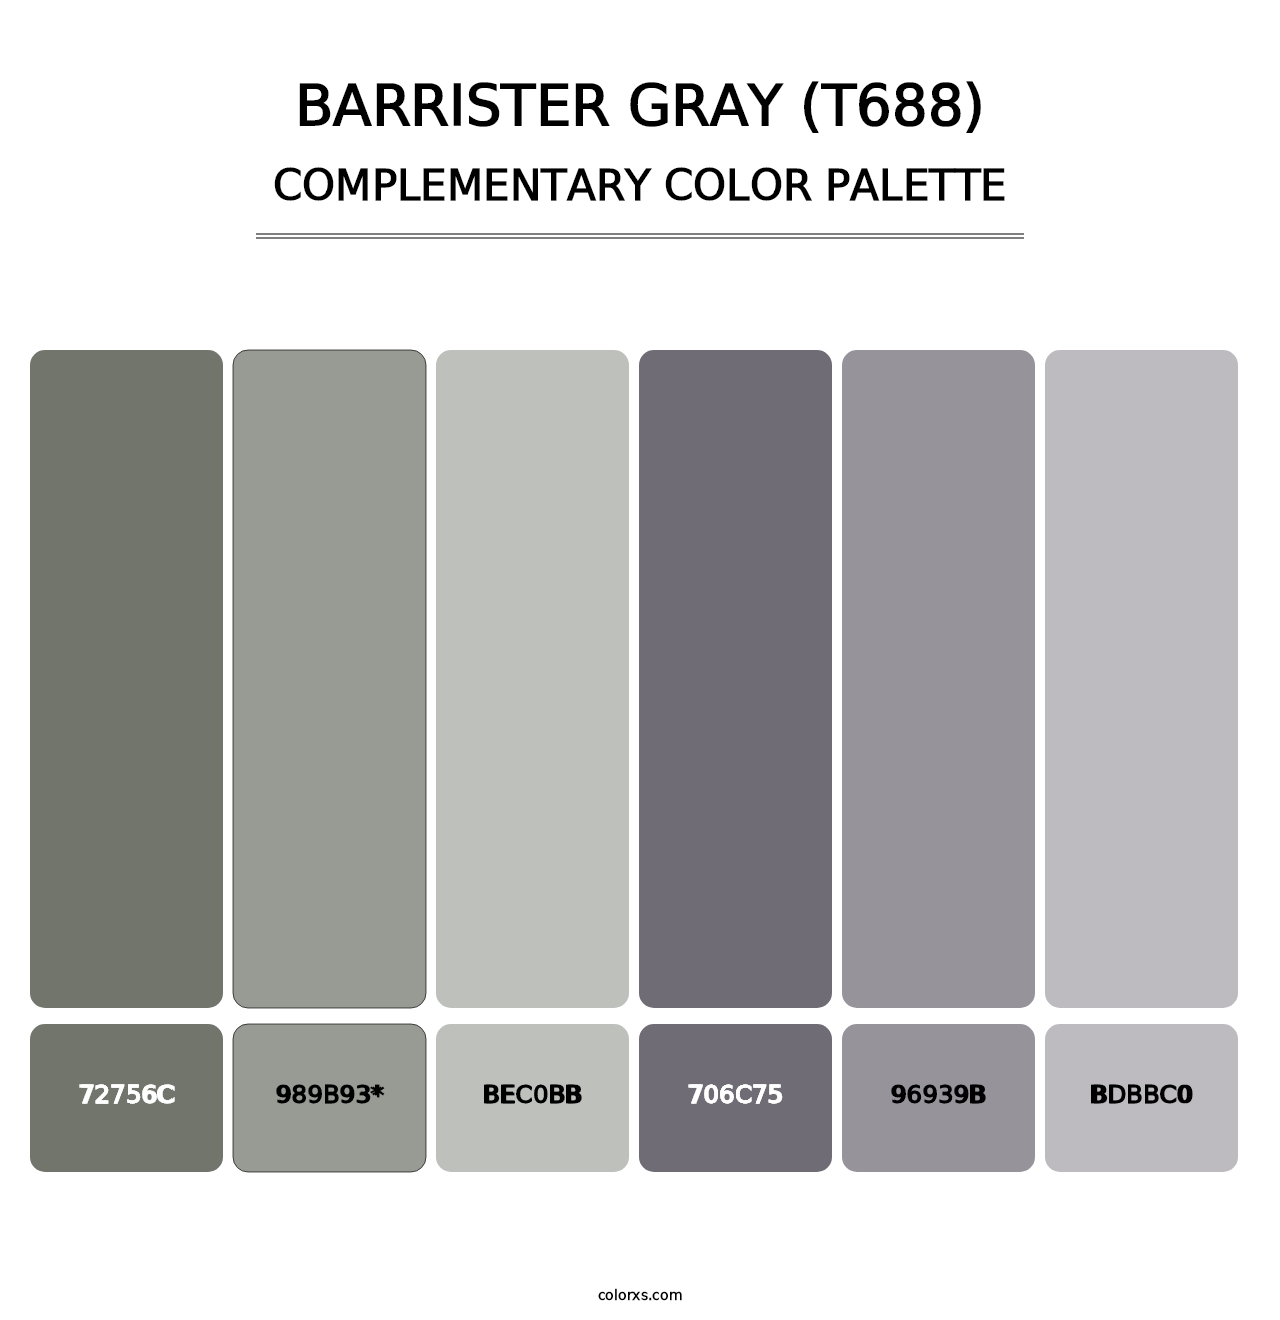 Barrister Gray (T688) - Complementary Color Palette